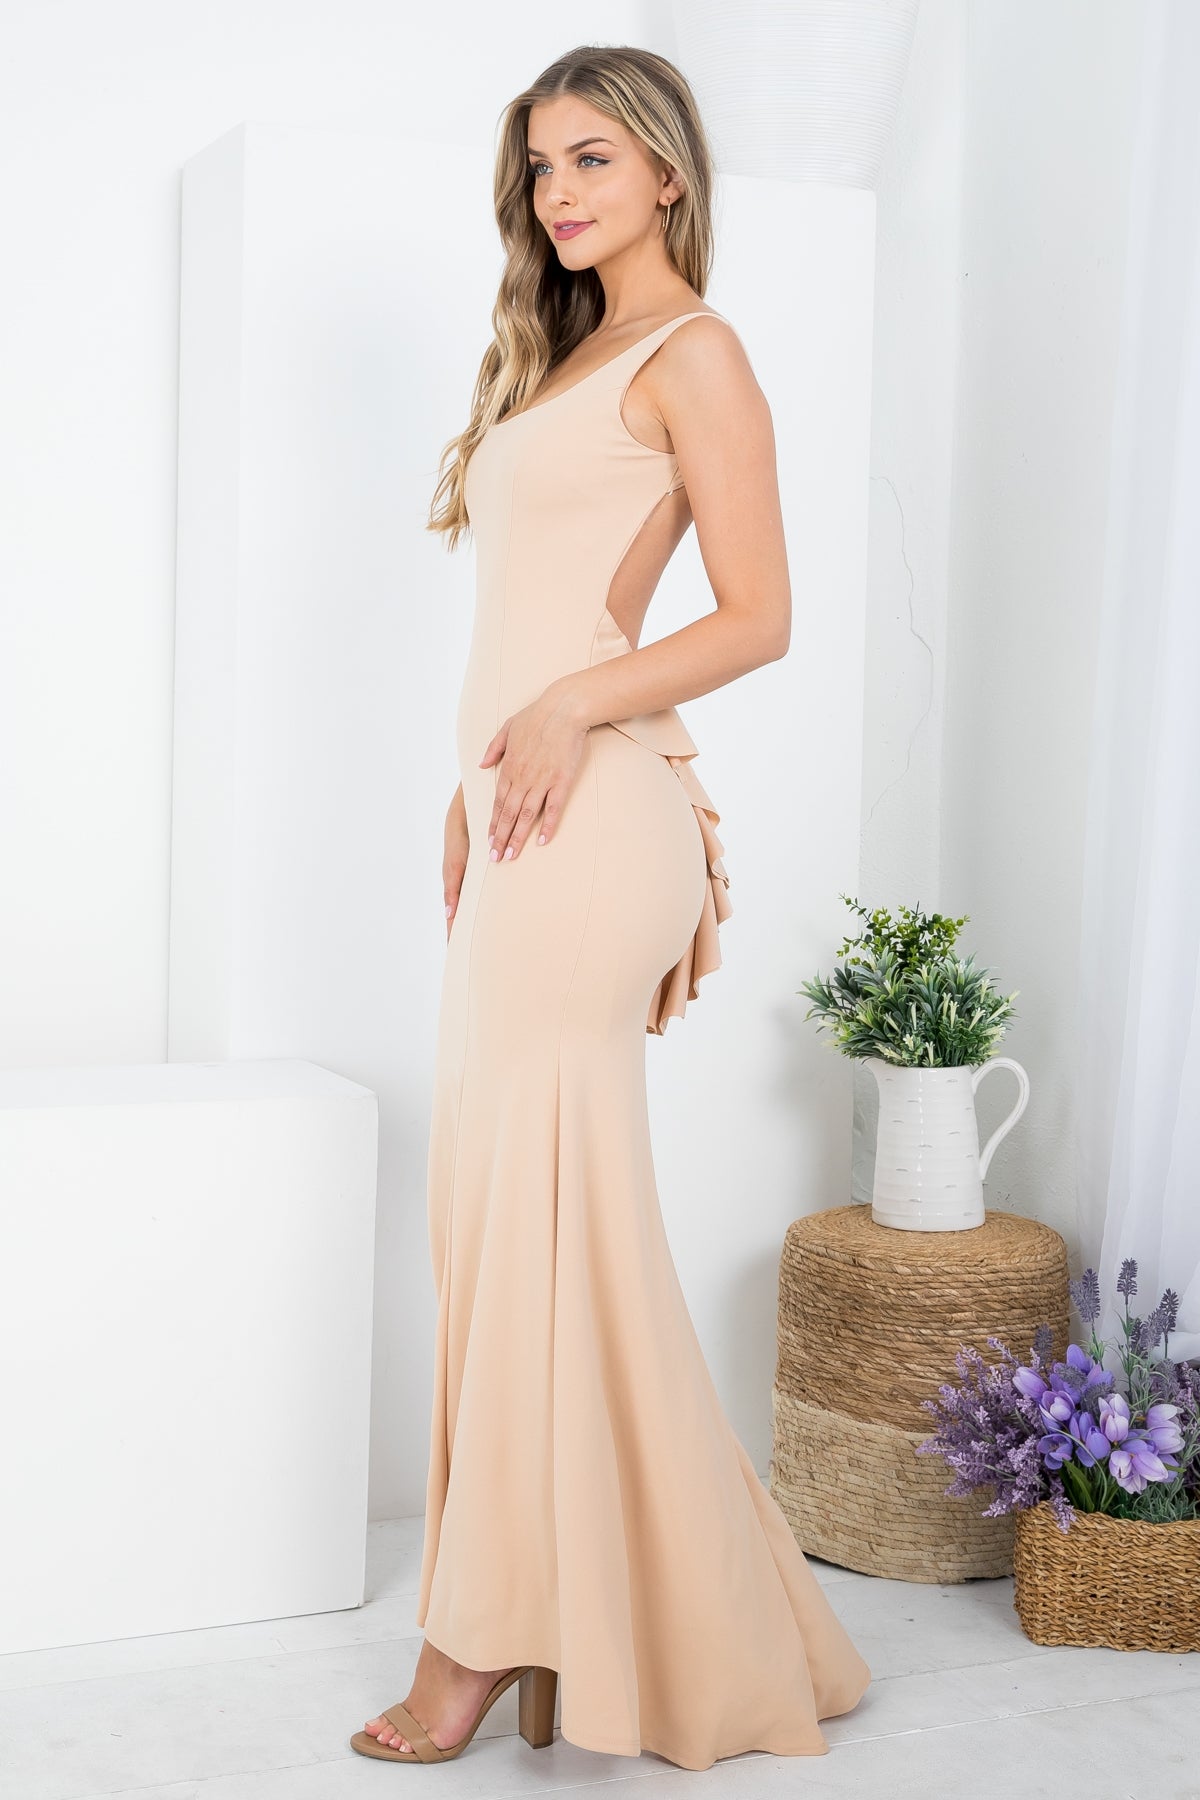 Nude Square Neckline With Ruffle Drape Back Detail Long Dress (Pack of 6 PCS)